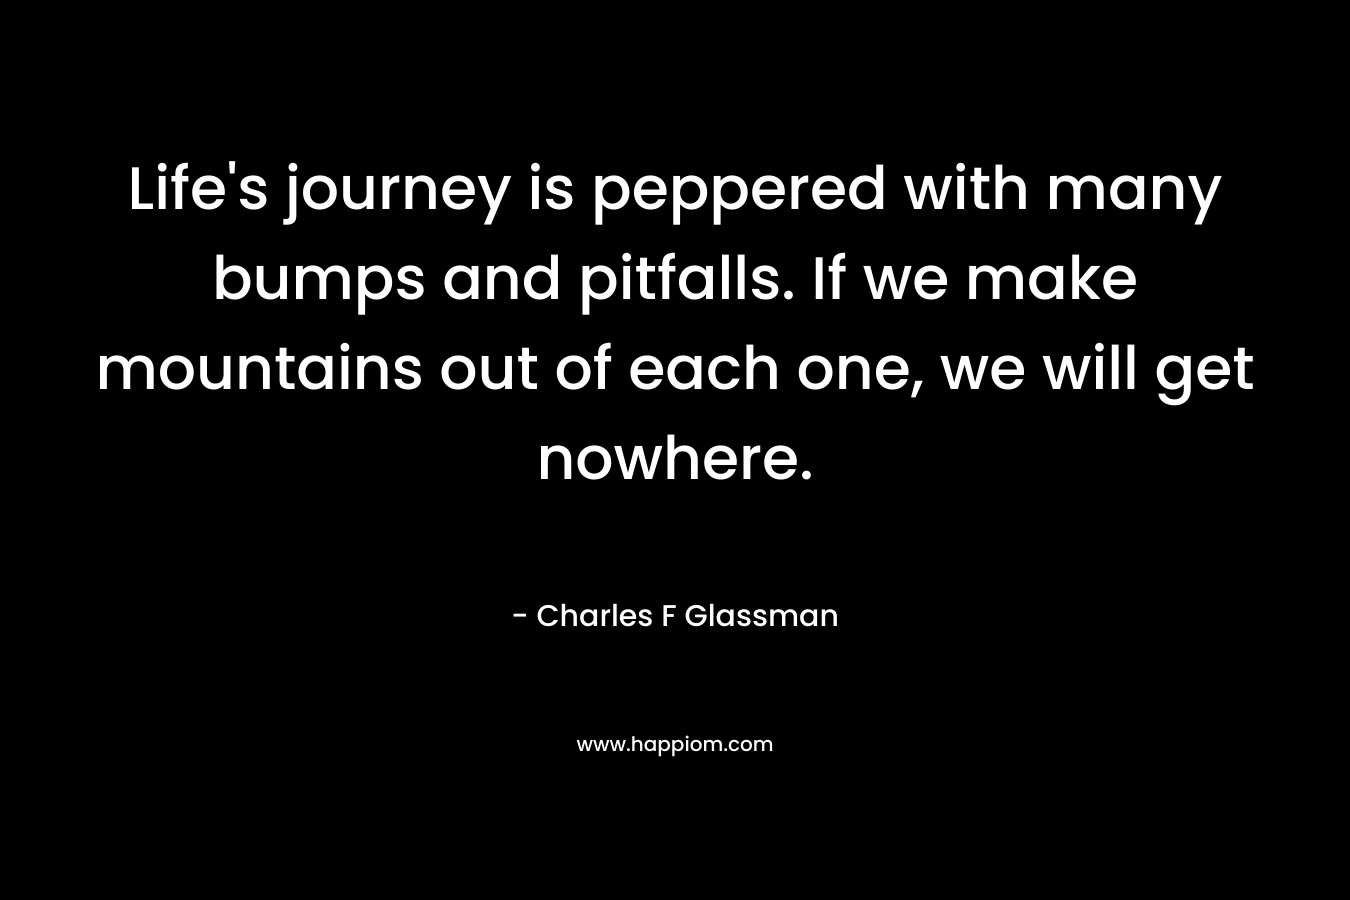 Life’s journey is peppered with many bumps and pitfalls. If we make mountains out of each one, we will get nowhere. – Charles F Glassman